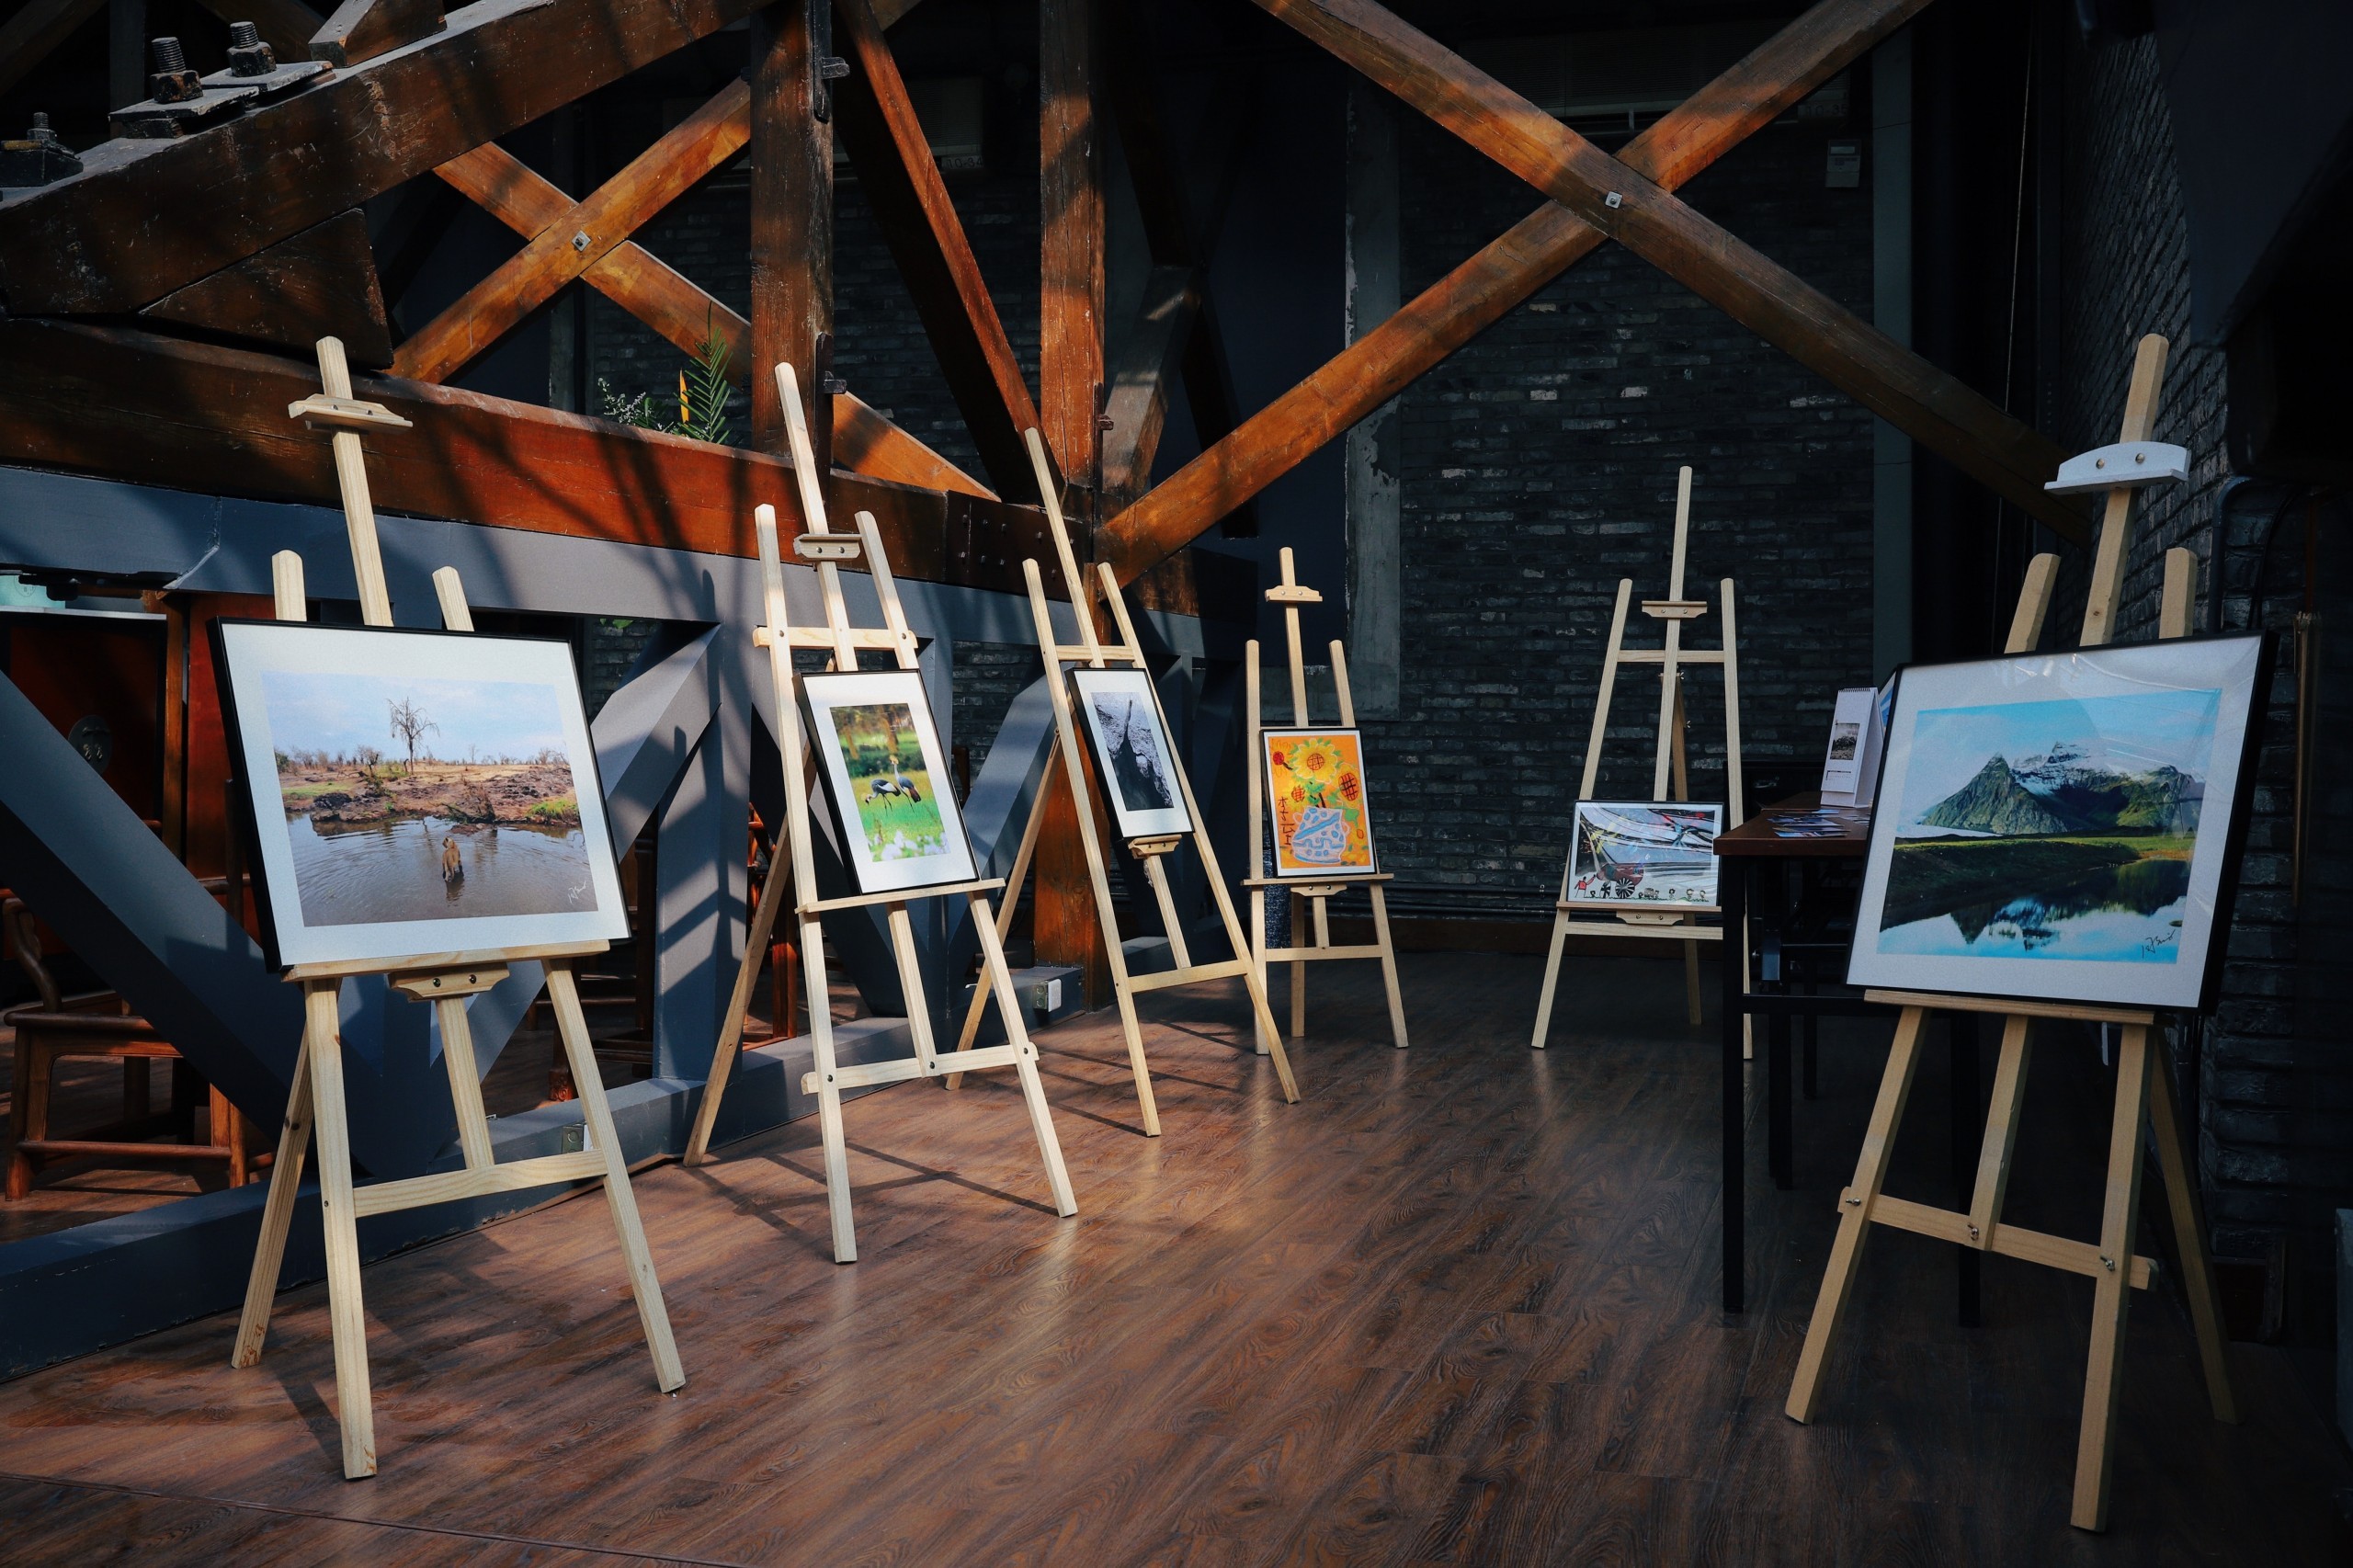 Paintings displayed on easels